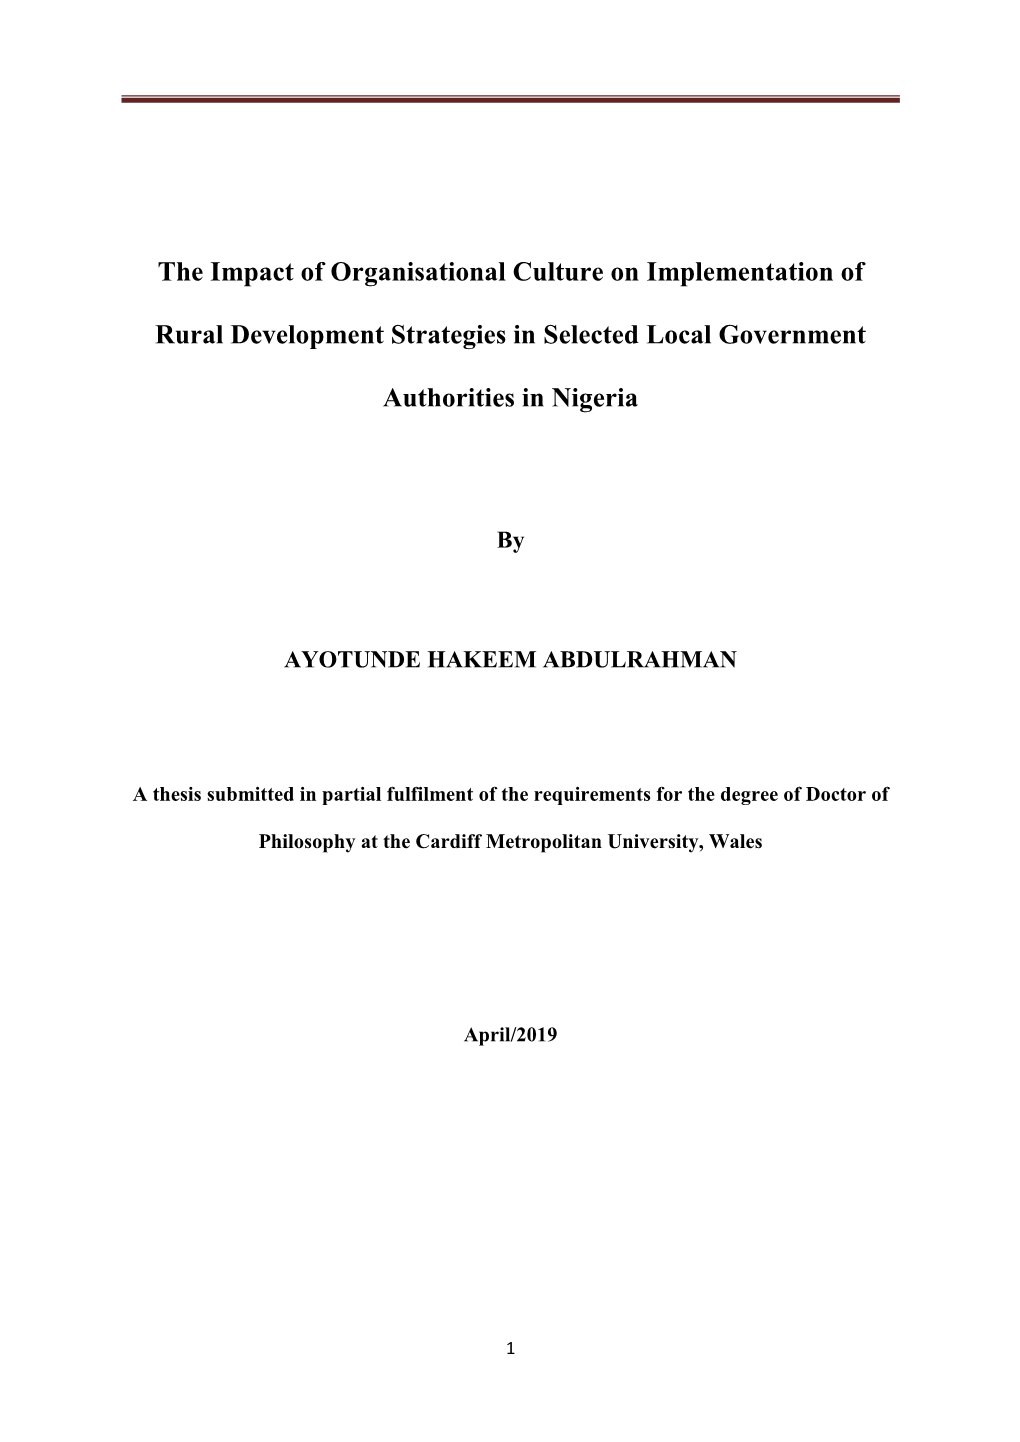 The Impact of Organisational Culture on Implementation of Rural